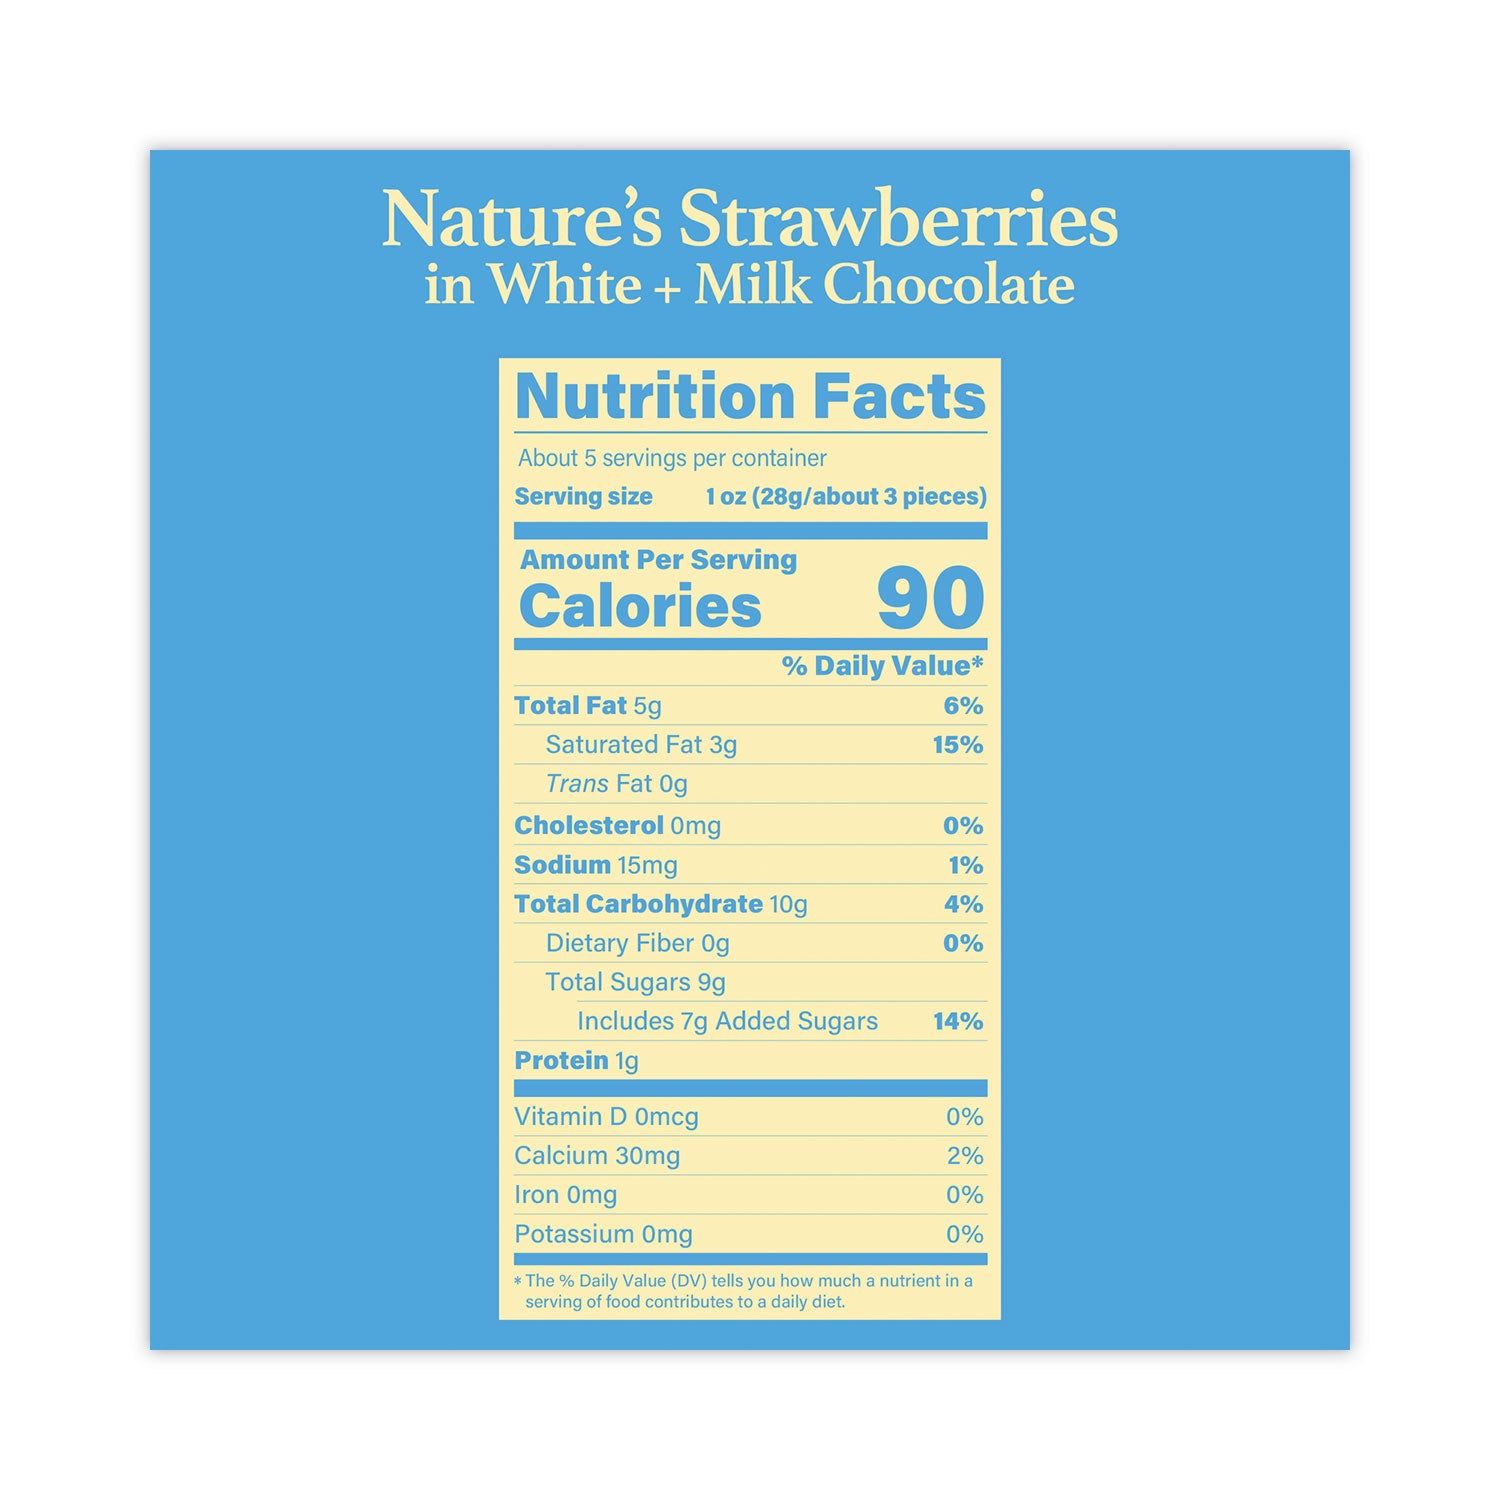 natures-hyper-chilled-strawberries-in-white-and-milk-chocolate-5-oz-cup-8-carton-ships-in-1-3-business-days_grr90300269 - 2